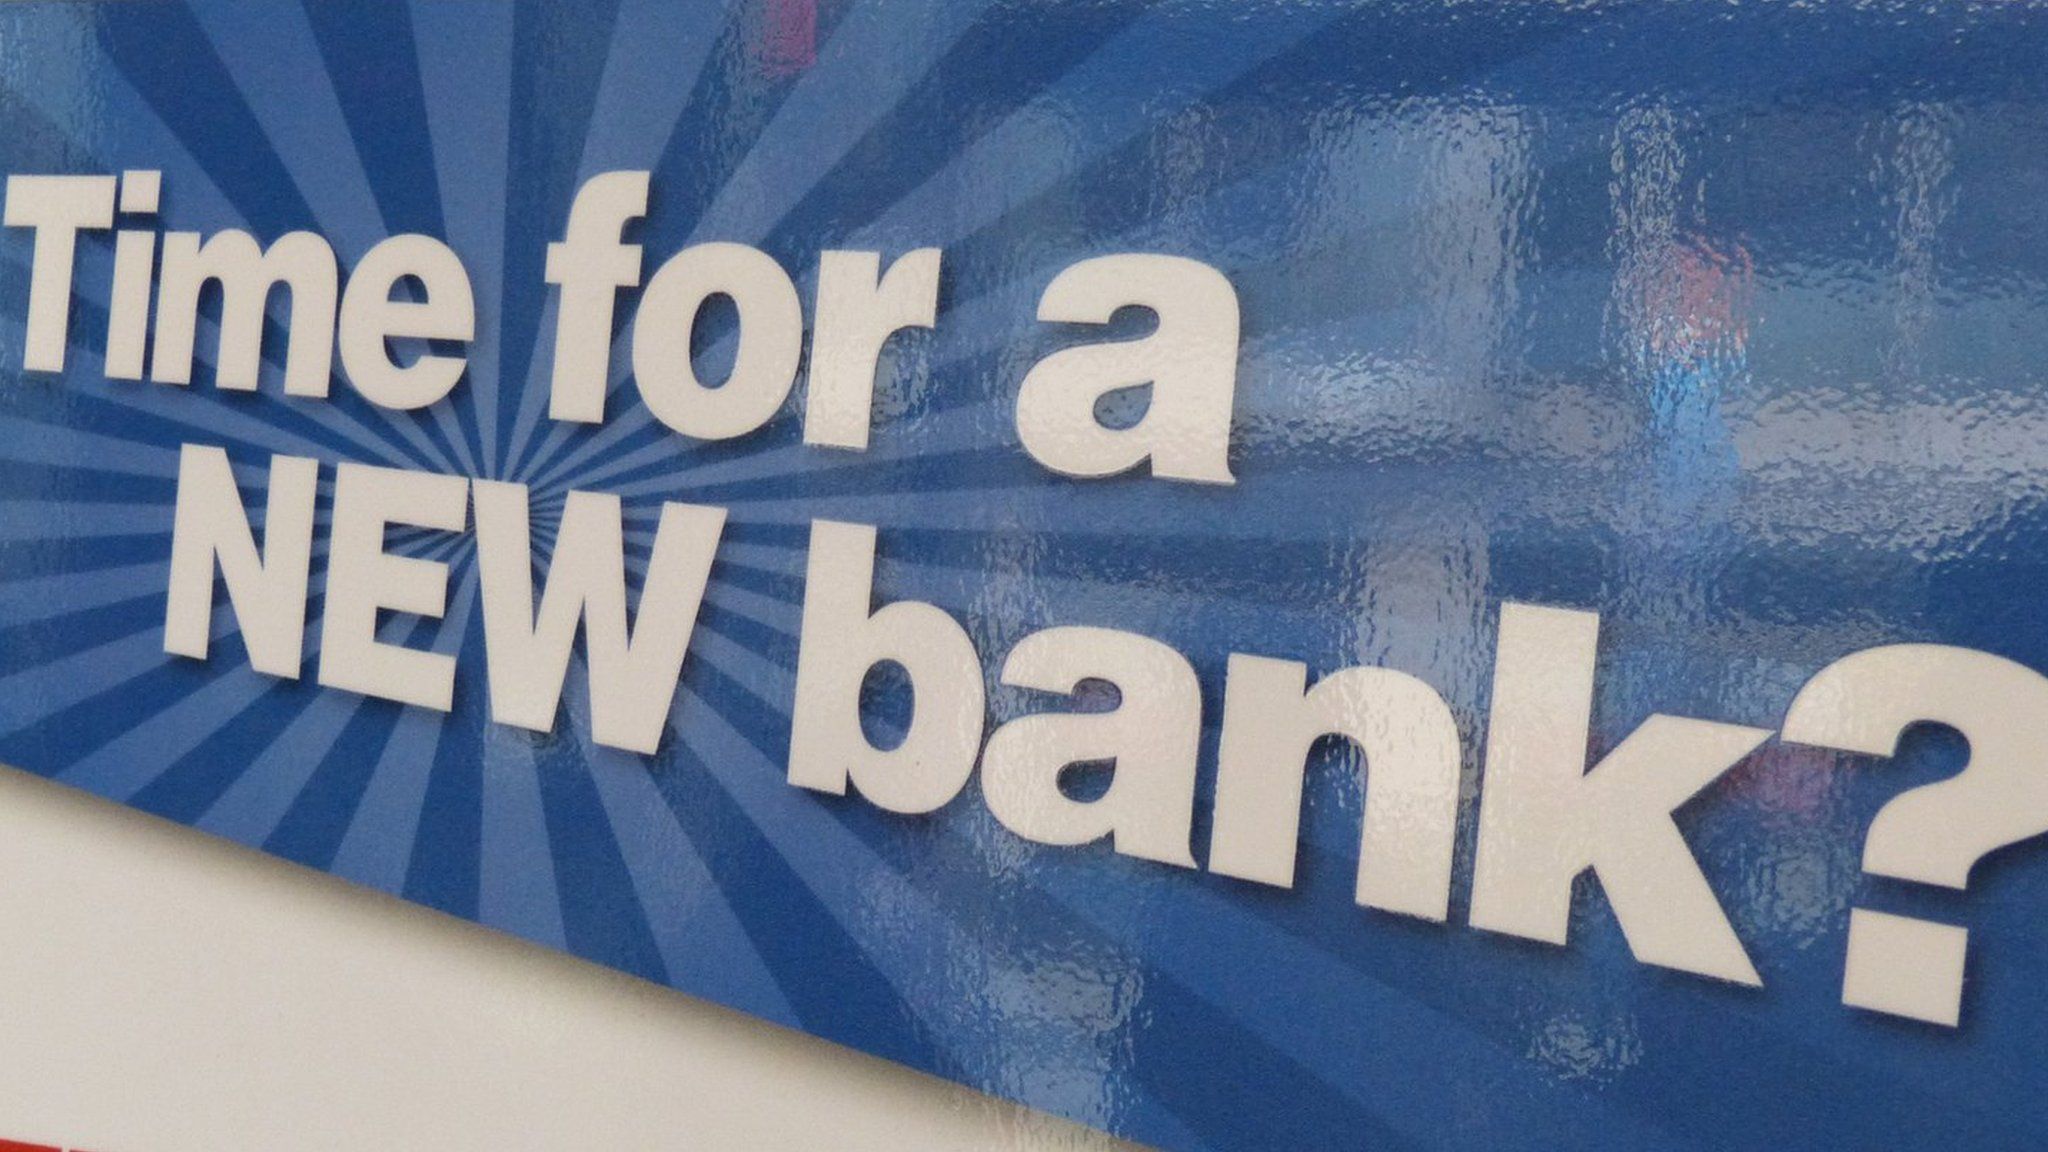 sign: Time for a new bank?